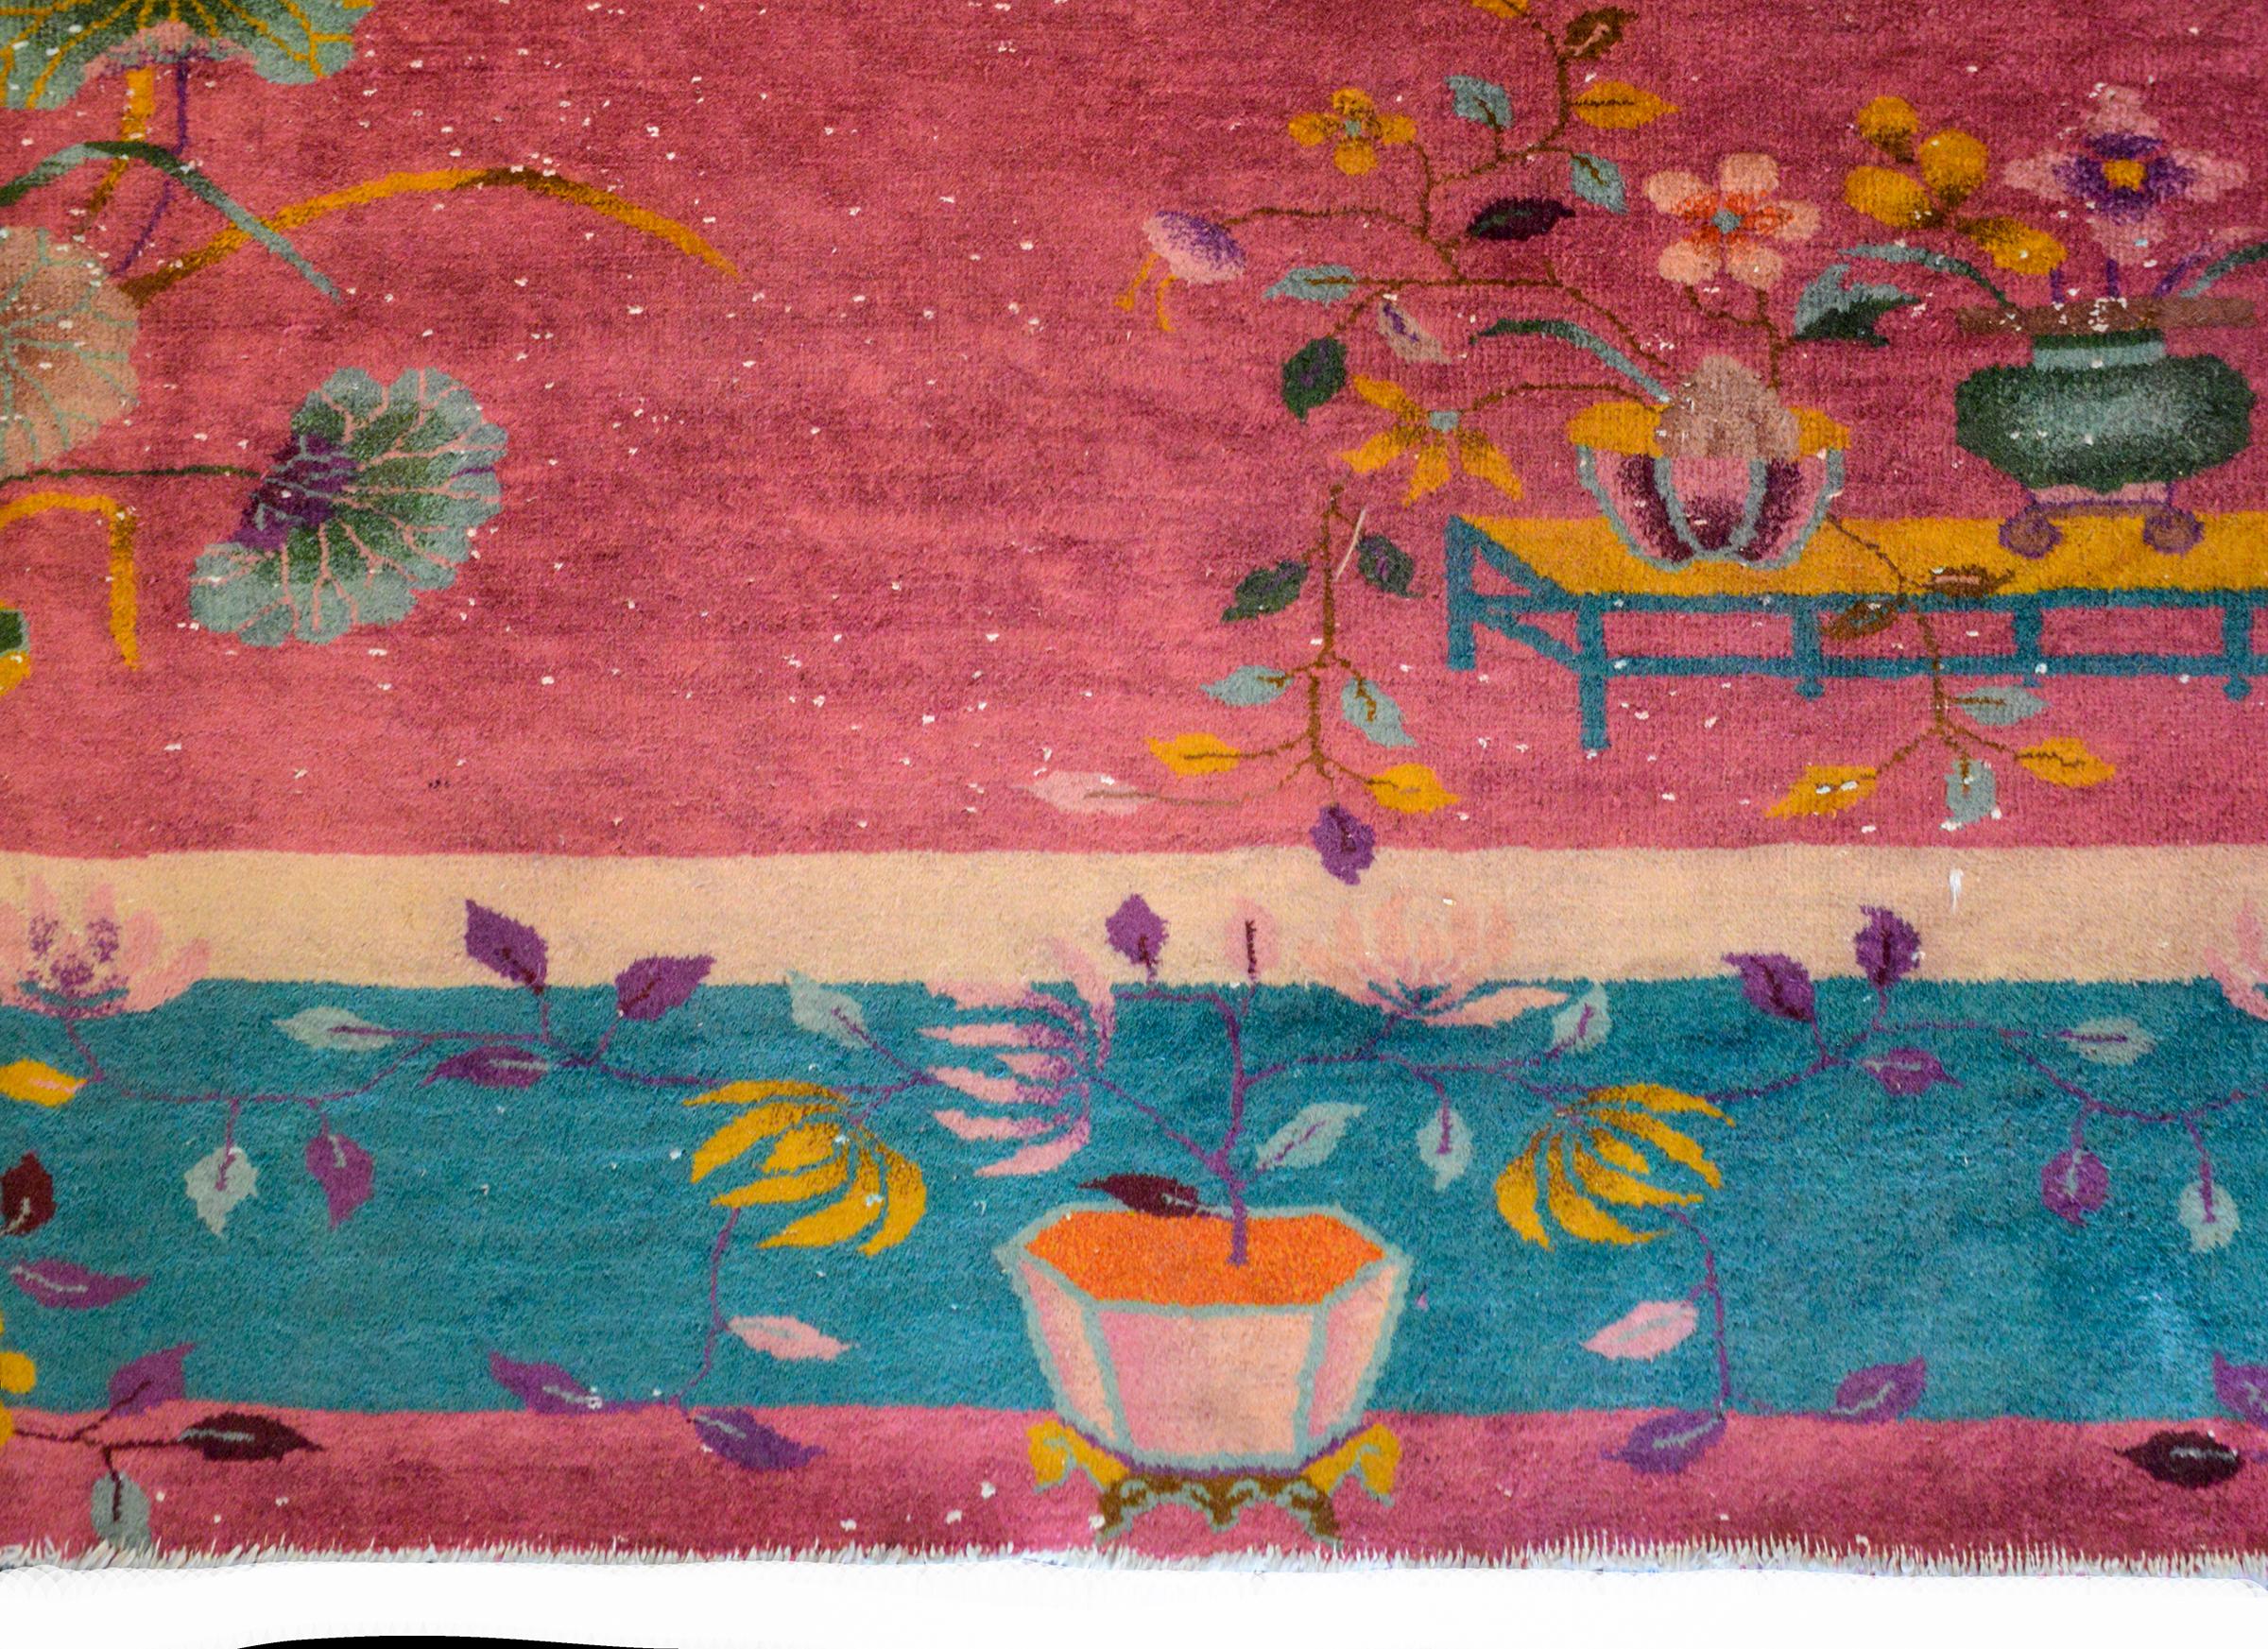 A wonderful bold early 20th century Chinese Art Deco rug with a fuchsia ground surrounded by a thin inner cream satire border, a wide turquoise border, and a thin outer fuchsia border. Each corner of the field shows various auspicious potted flowers